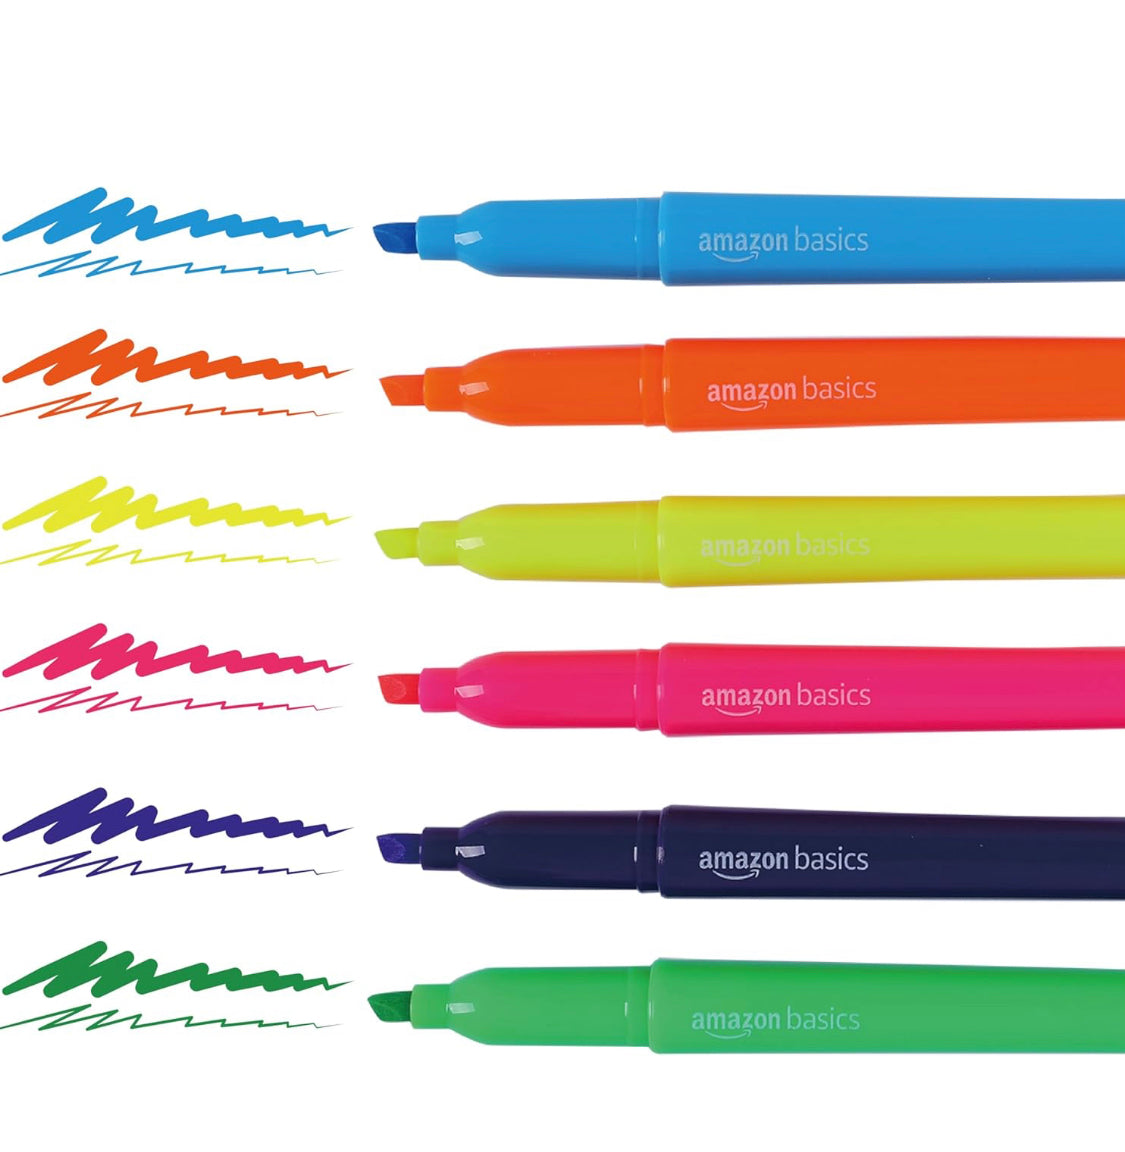 Basics Chisel Tip, Fluorescent Ink Highlighters, Assorted Colors - Pack of 12